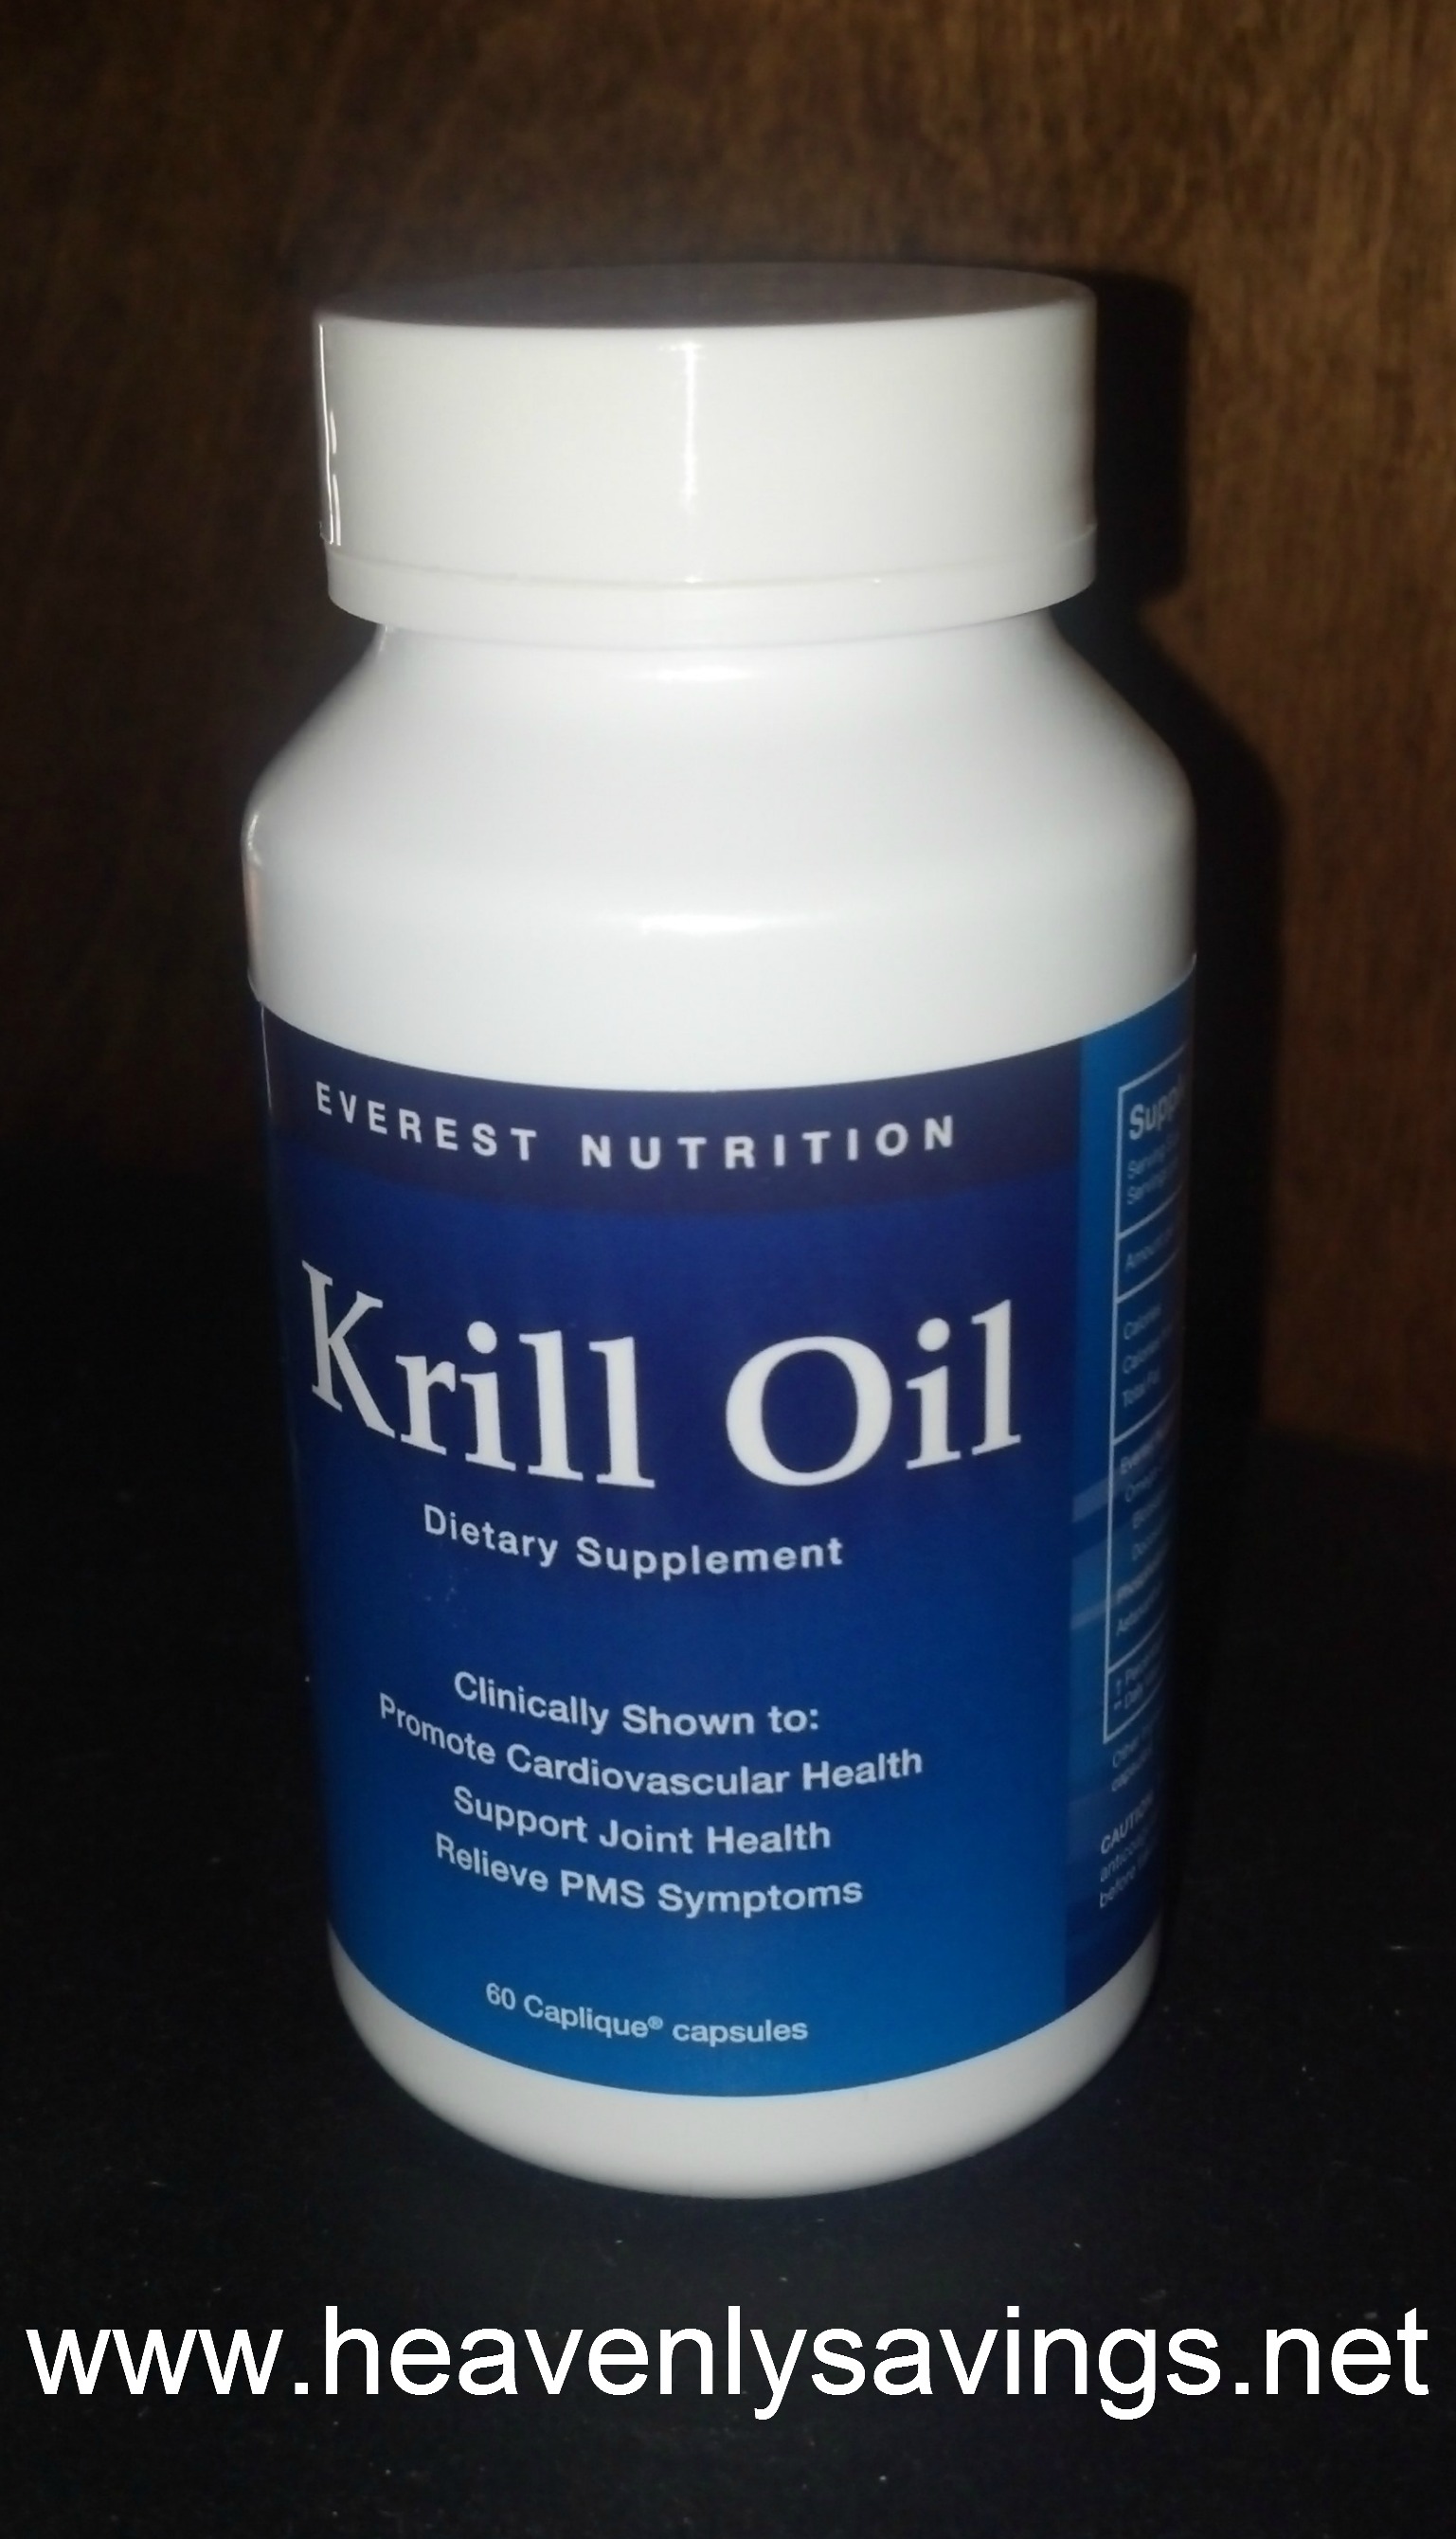 ~Catch of the Day ~ Improve Your Overall Health With Krill Oil! Everest Nutrition Krill Oil Review and #Giveaway!! Ends 8/06/13!